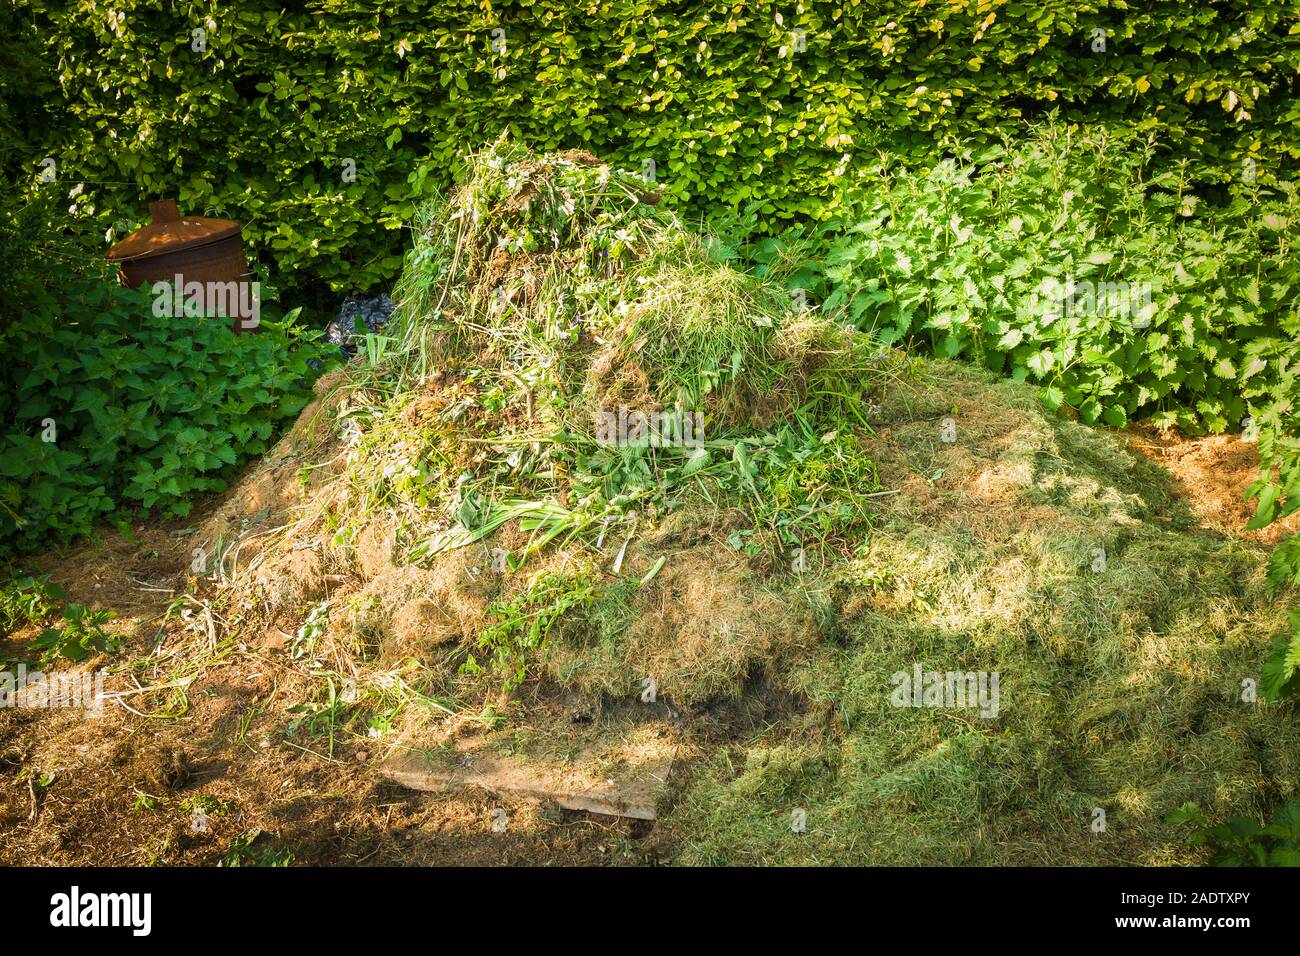 A pile of accumulating green garden waste at the start of a routine composting programme in an English garden Stock Photo